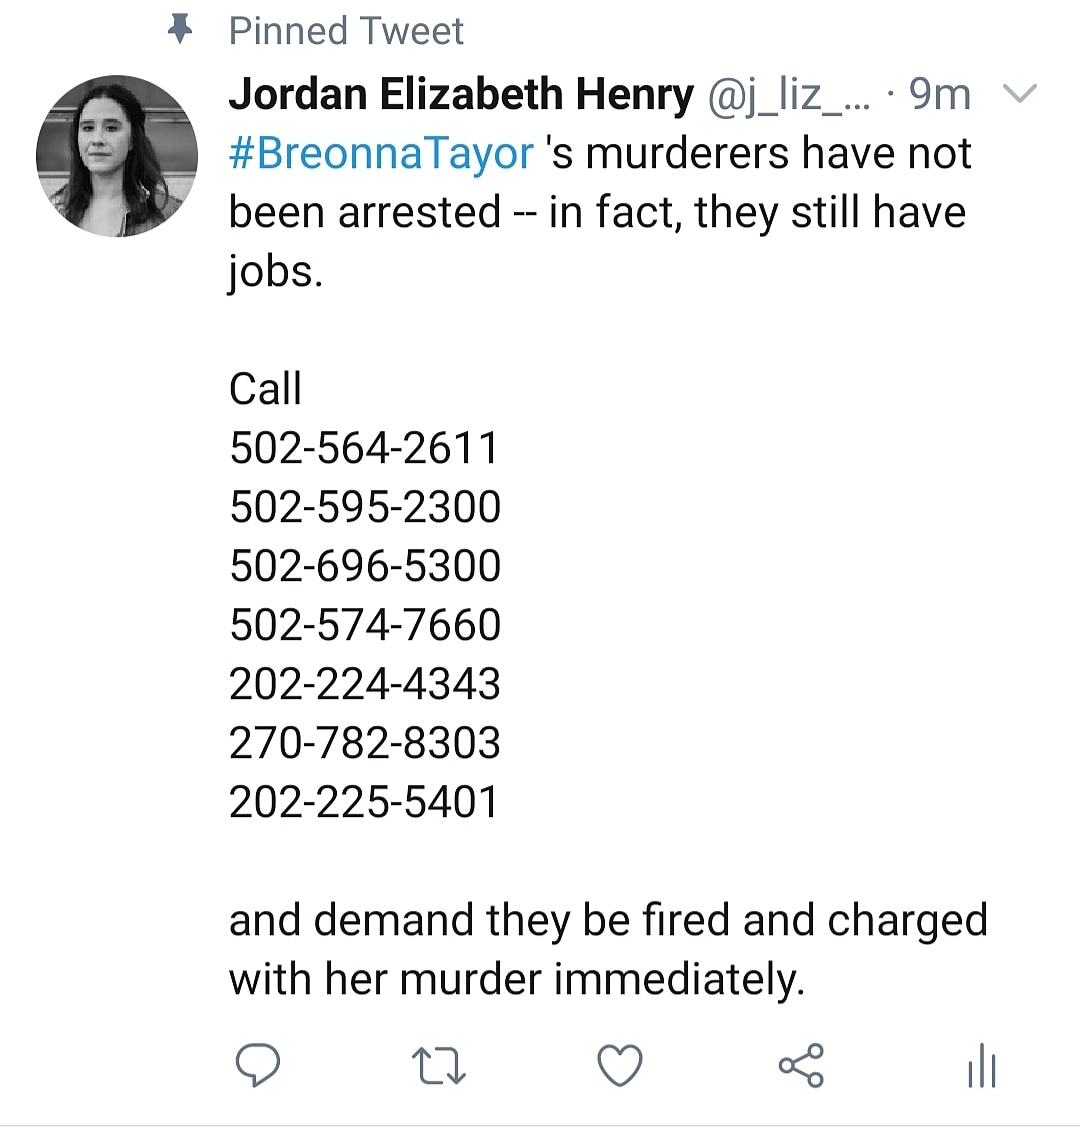 Here are some numbers you can call to get justice for  #BreonnaTaylor Brett Hankison has been fired but Myles Cosgrove and John Mattingly still have their jobs. No charges have been filed against any of them. Call call call.